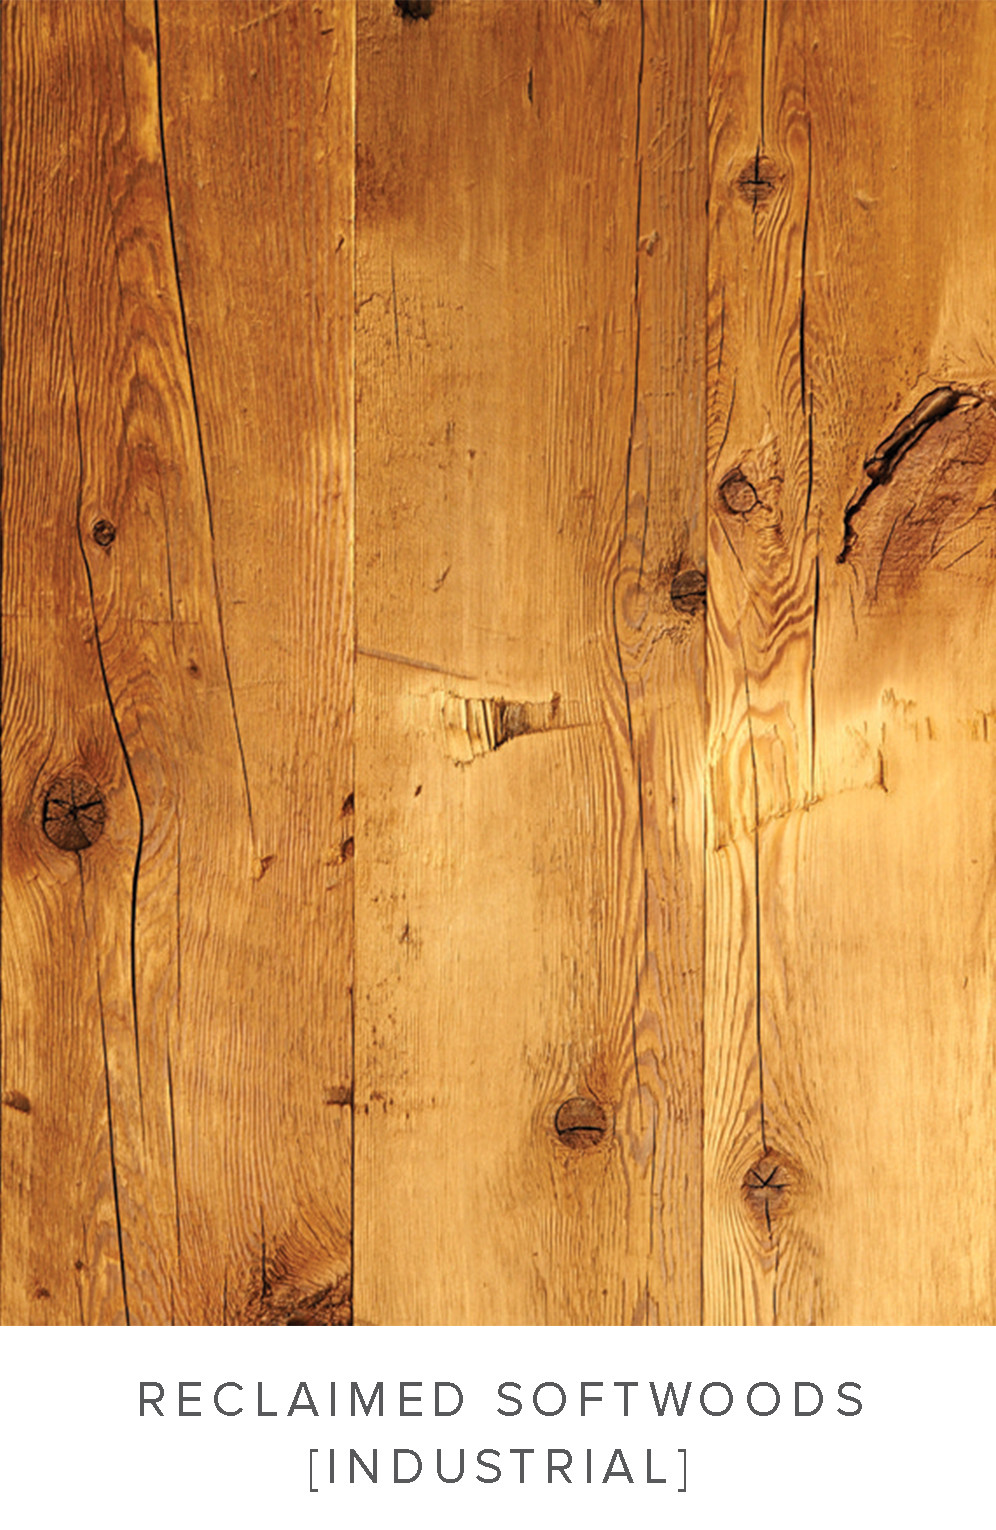 29 Popular Hardwood Flooring York Pa 2024 free download hardwood flooring york pa of extensive range of reclaimed wood flooring all under one roof at the for reclaimed softwoods industrial